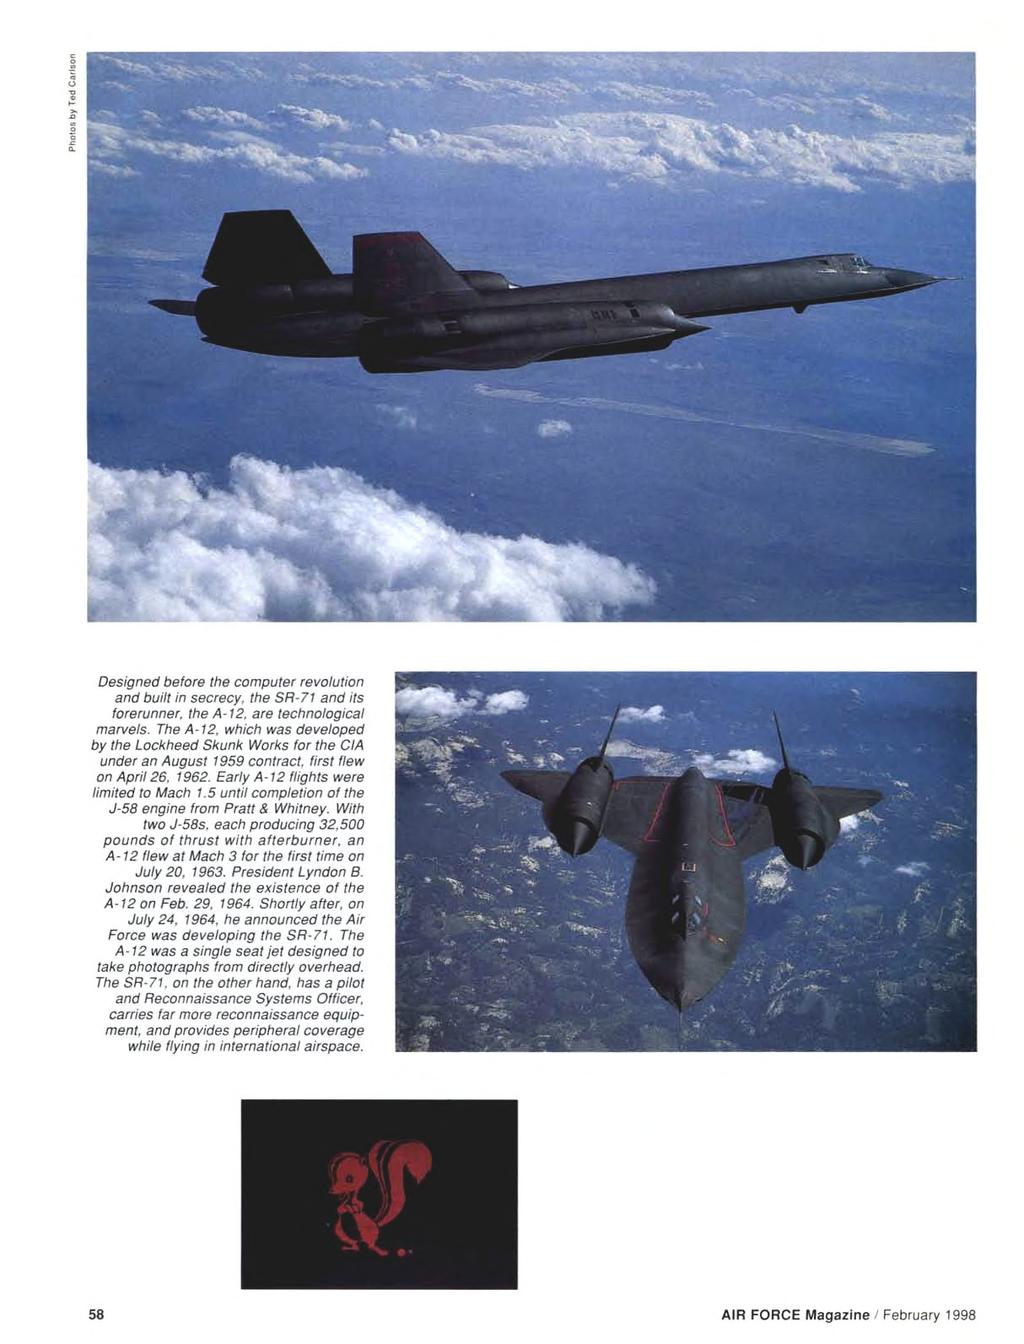 Designed before the computer revolution and built in secrecy, the SR-71 and its forerunner, the A-12, are technological marvels.